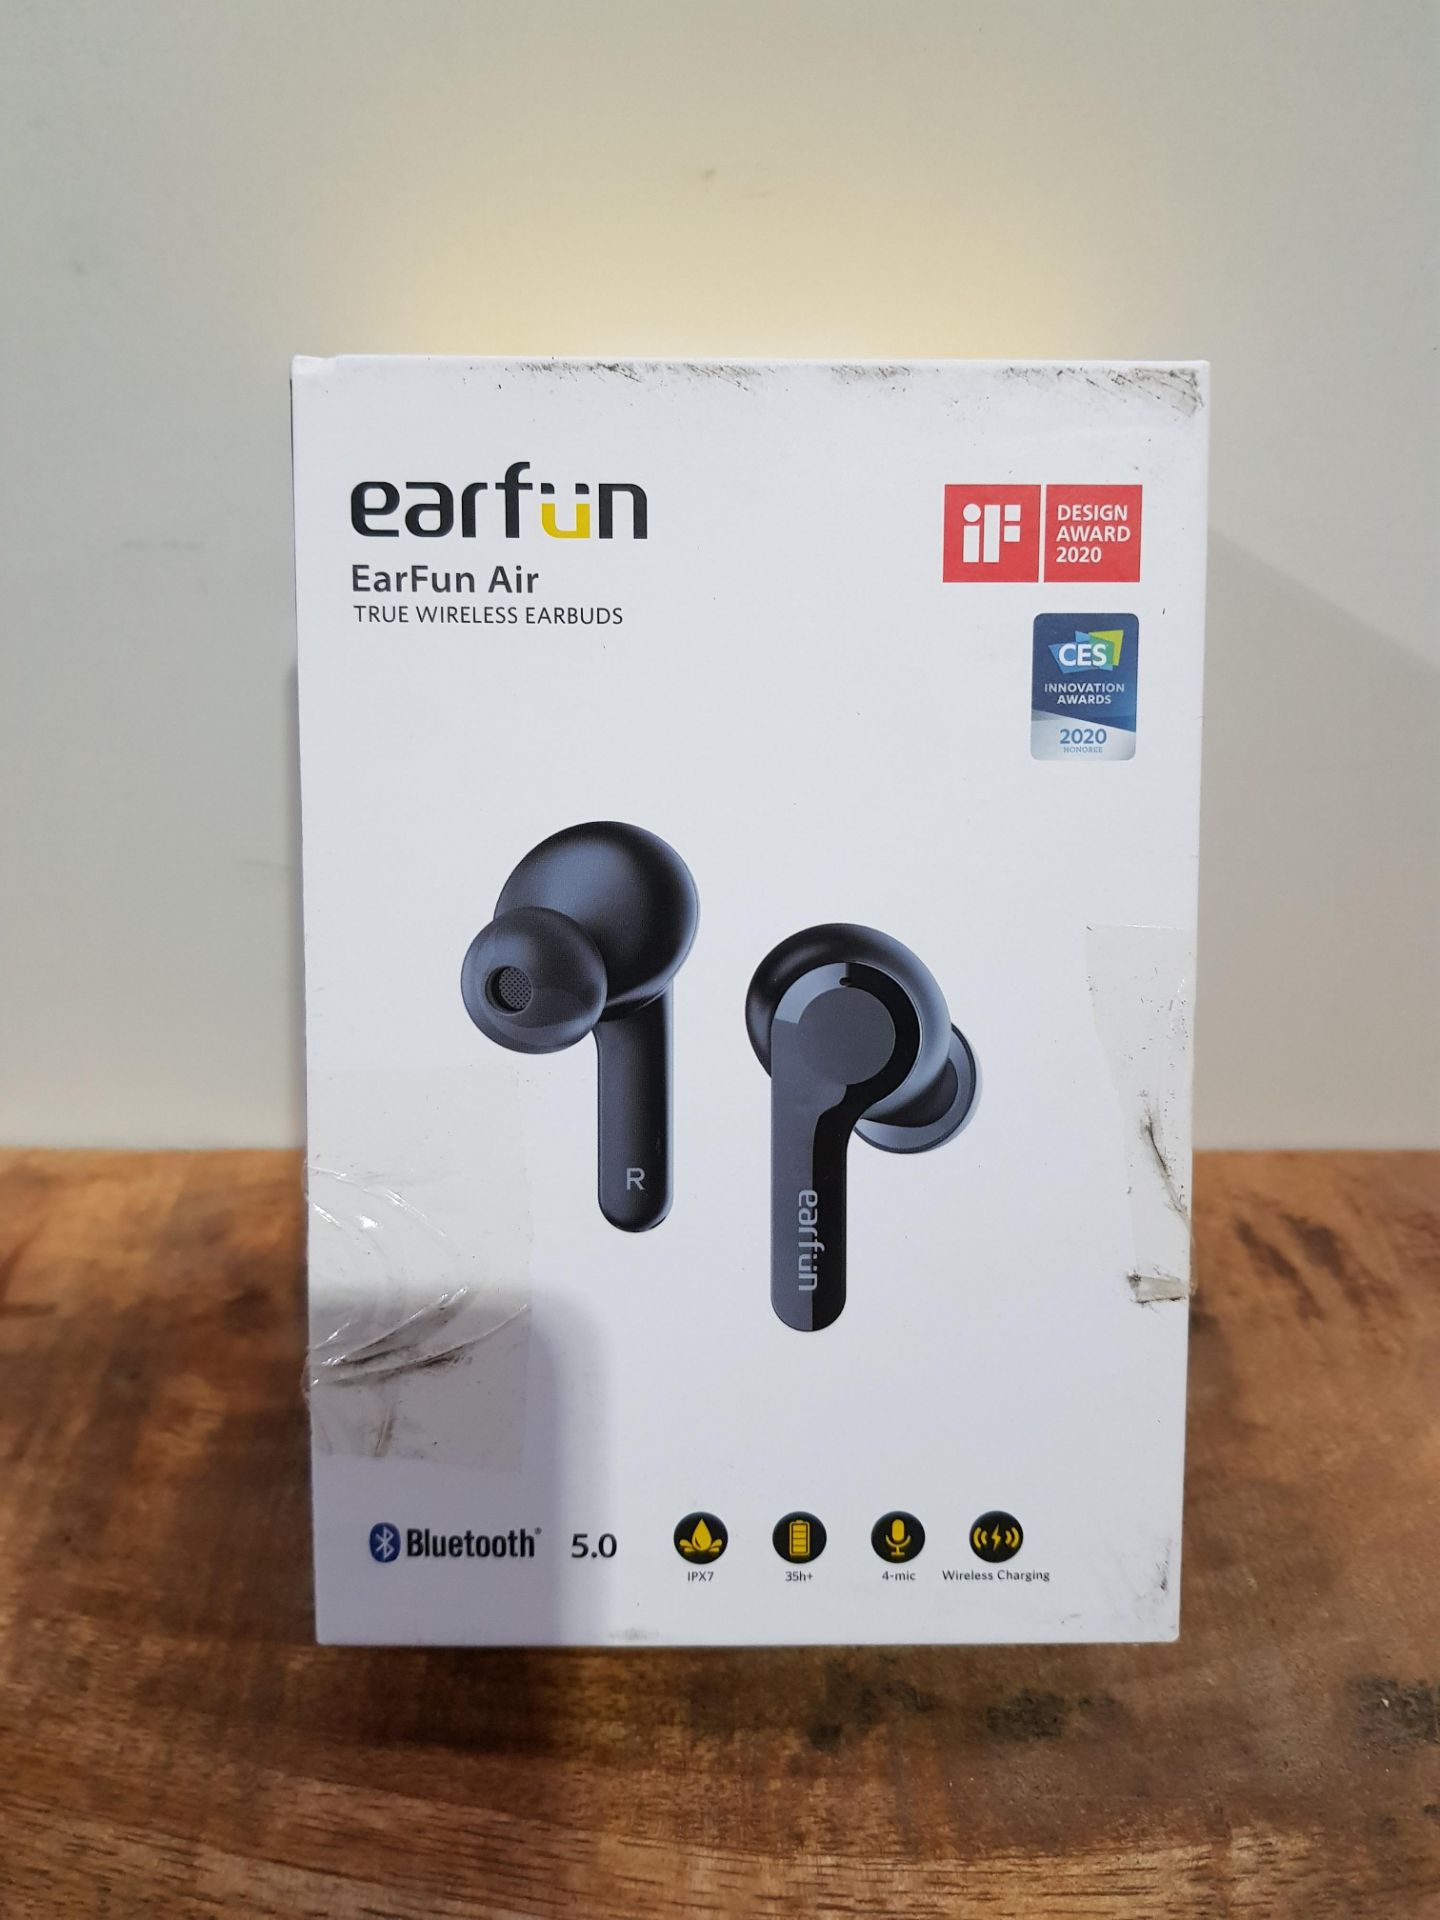 Wireless Earbuds, EarFun Air 4 Mics Noise Cancelling, Wireless Charging, Bluetooth 5.0 Earbuds,